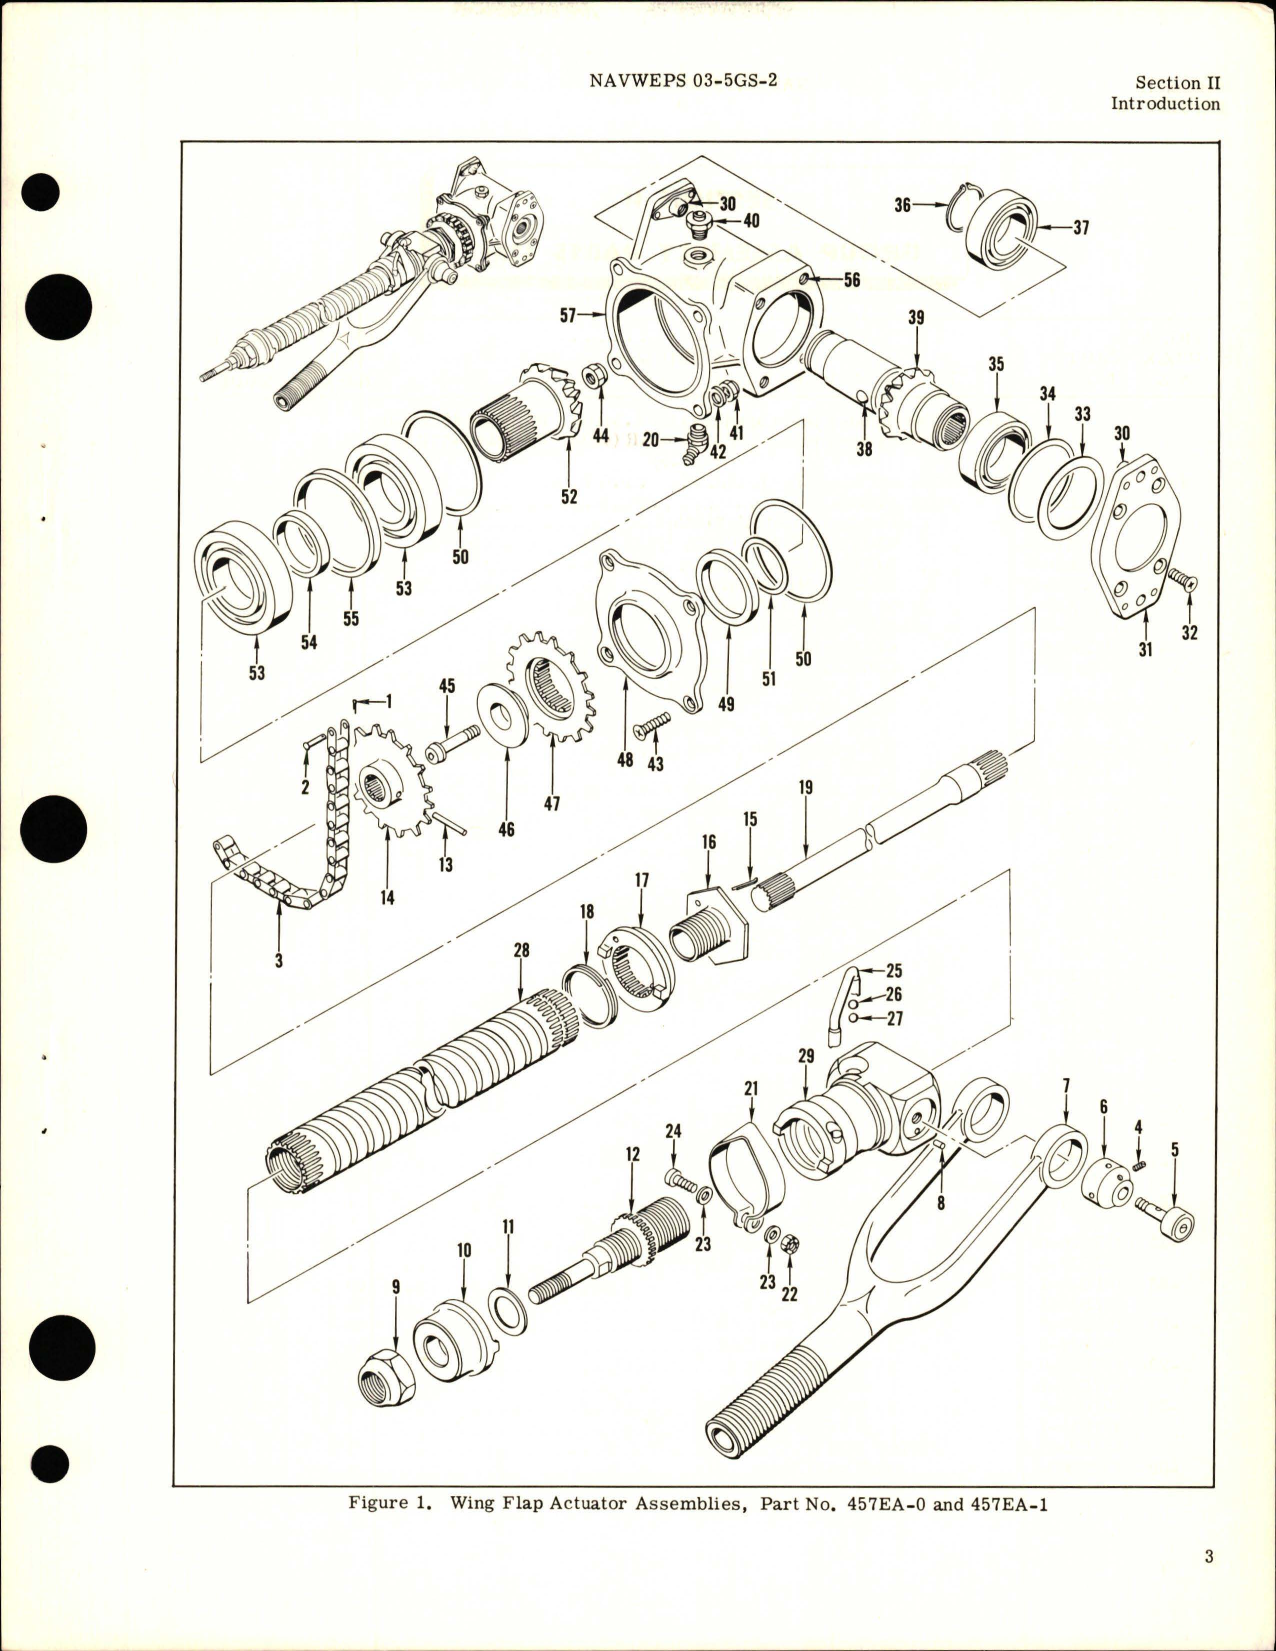 Sample page 5 from AirCorps Library document: Illustrated Parts Breakdown for Wing Flap Actuator Assembly - Parts 457EA-0 and 457EA-1